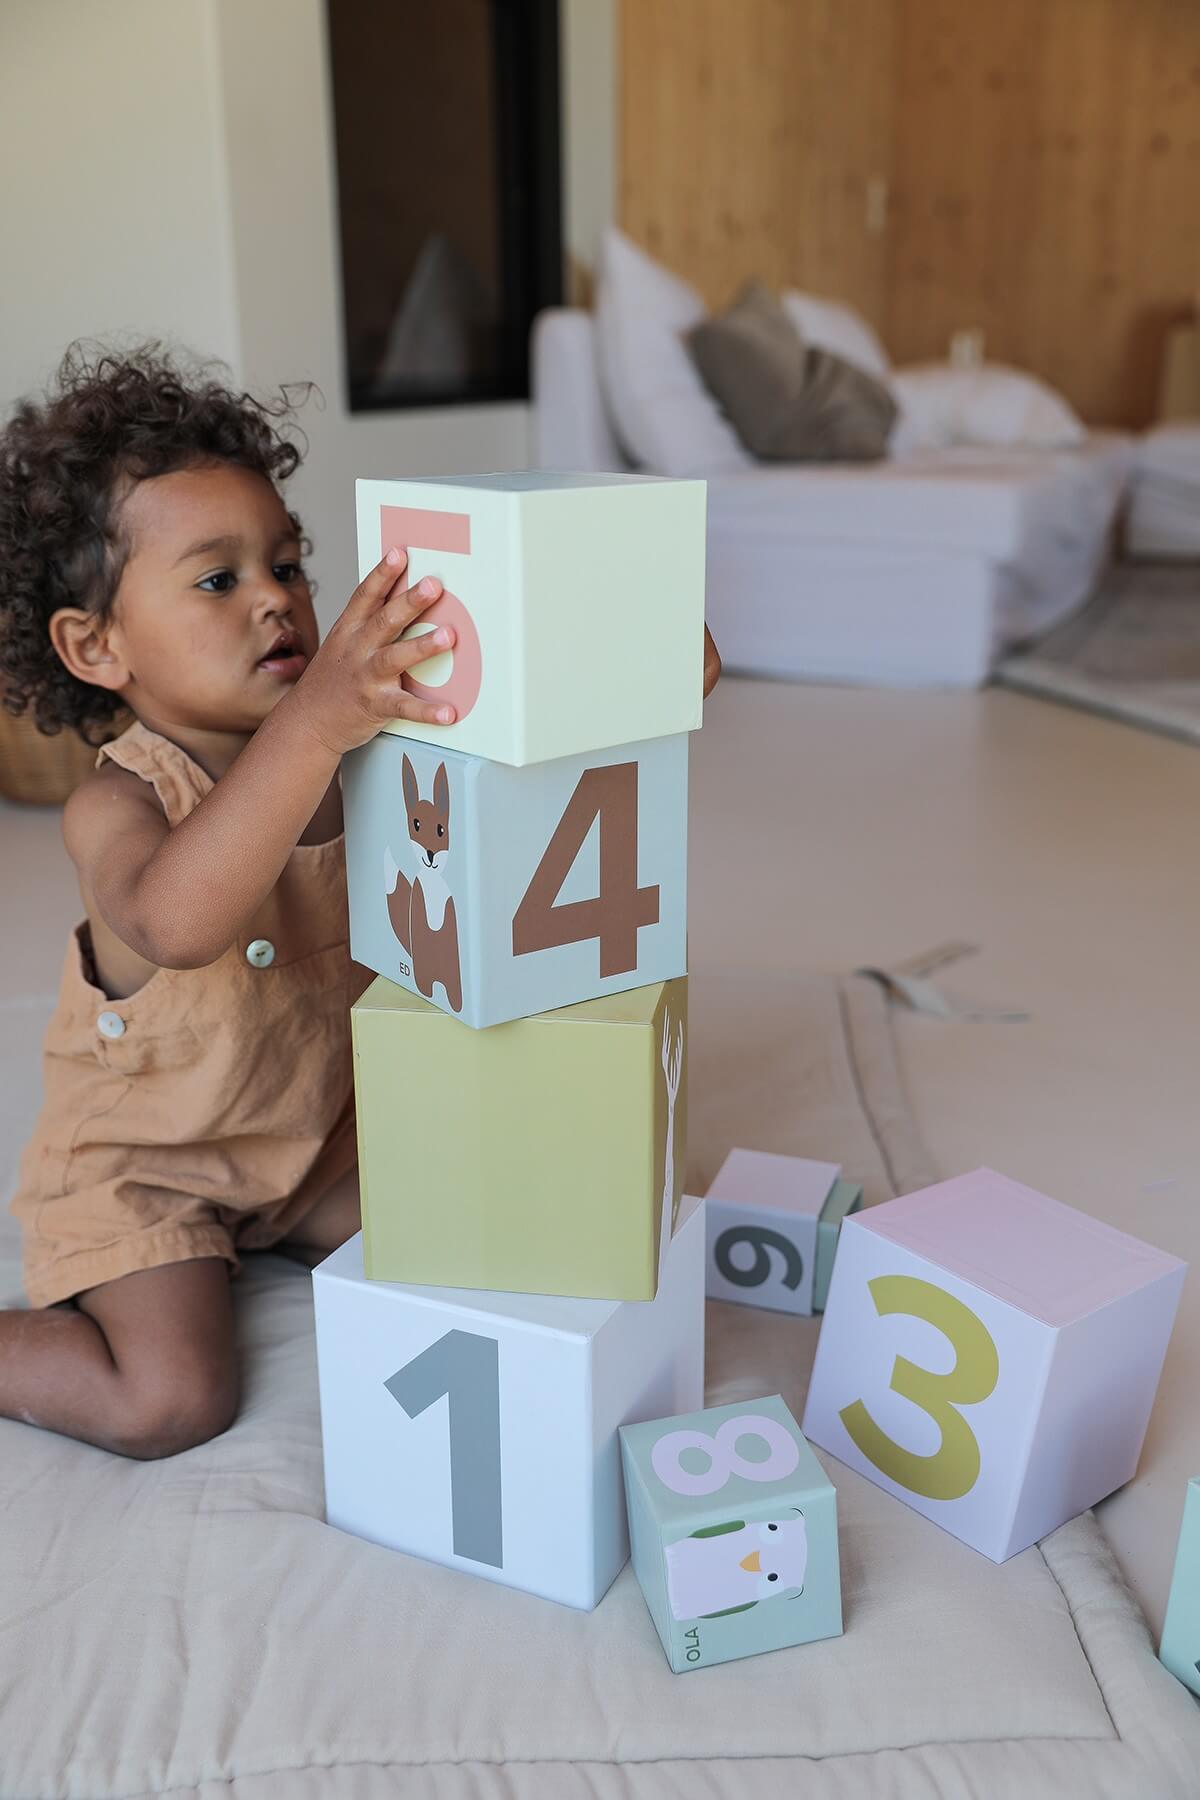 Early-Learning Building Blocks